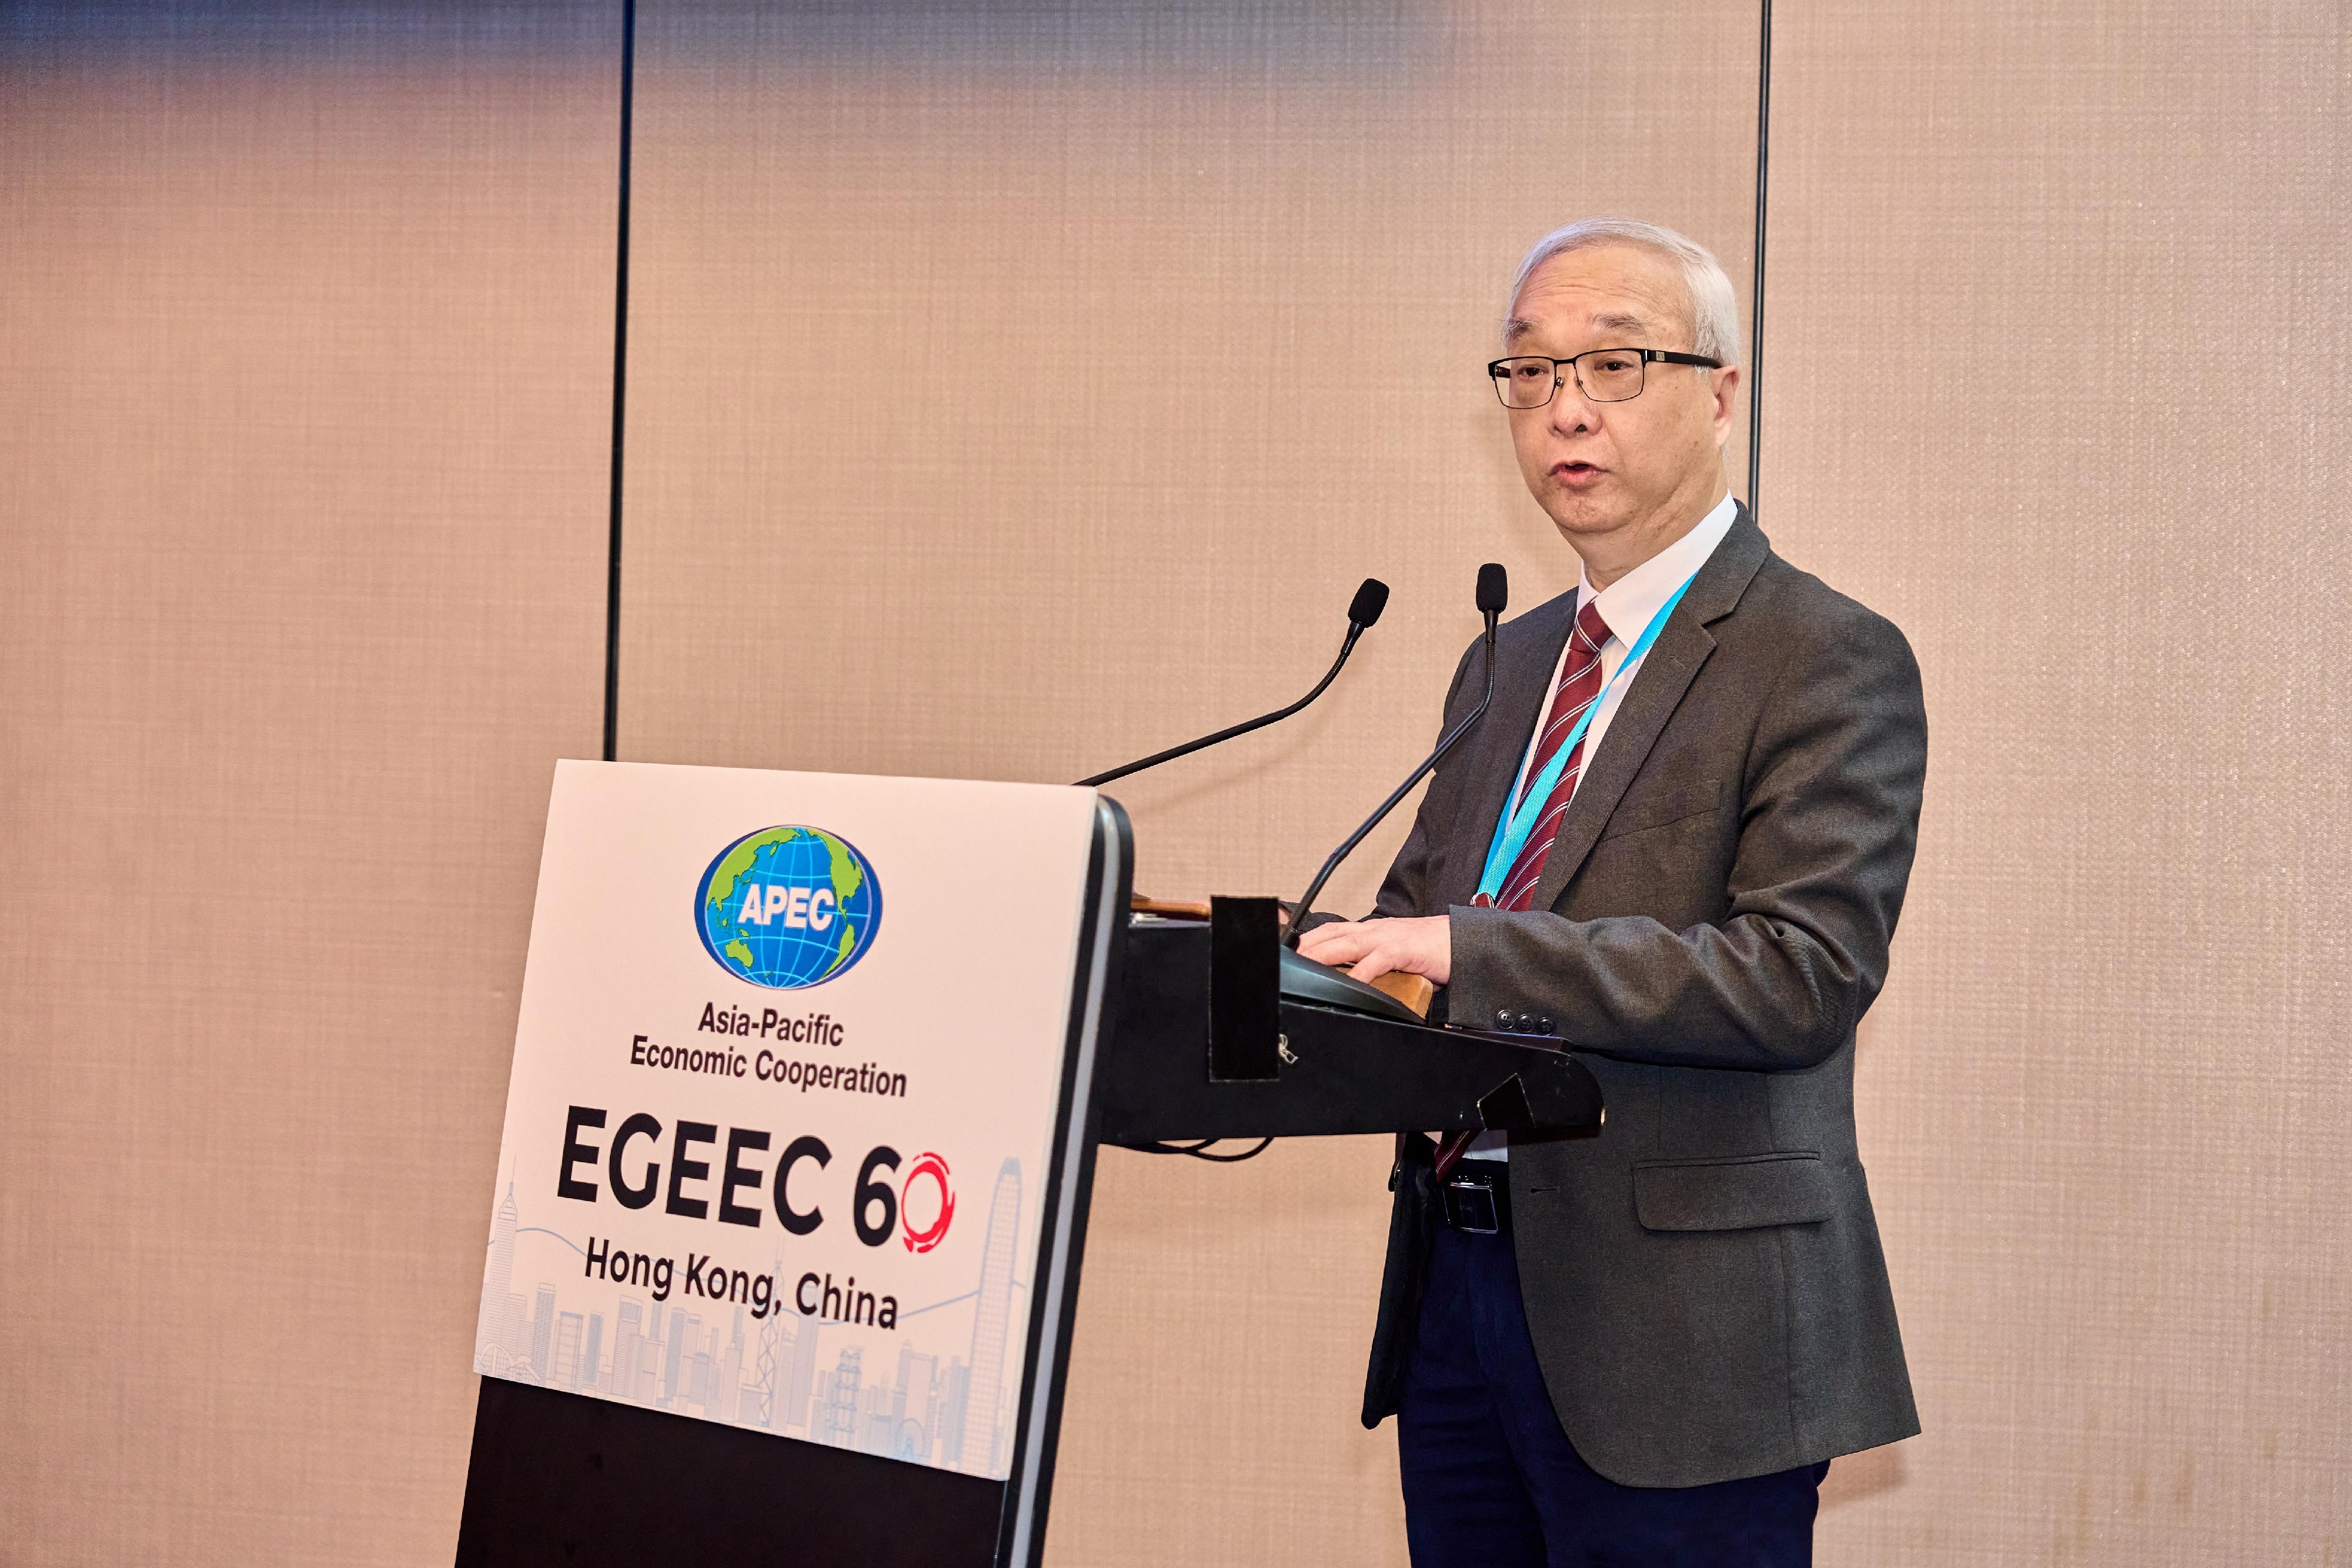      The 60th Meeting of the Expert Group on Energy Efficiency and Conservation of the Asia-Pacific Economic Cooperation is being held in Hong Kong today and tomorrow (March 15 and 16) in hybrid mode. Photo shows the Secretary for Environment and Ecology, Mr Tse Chin-wan, delivering the welcoming speech.